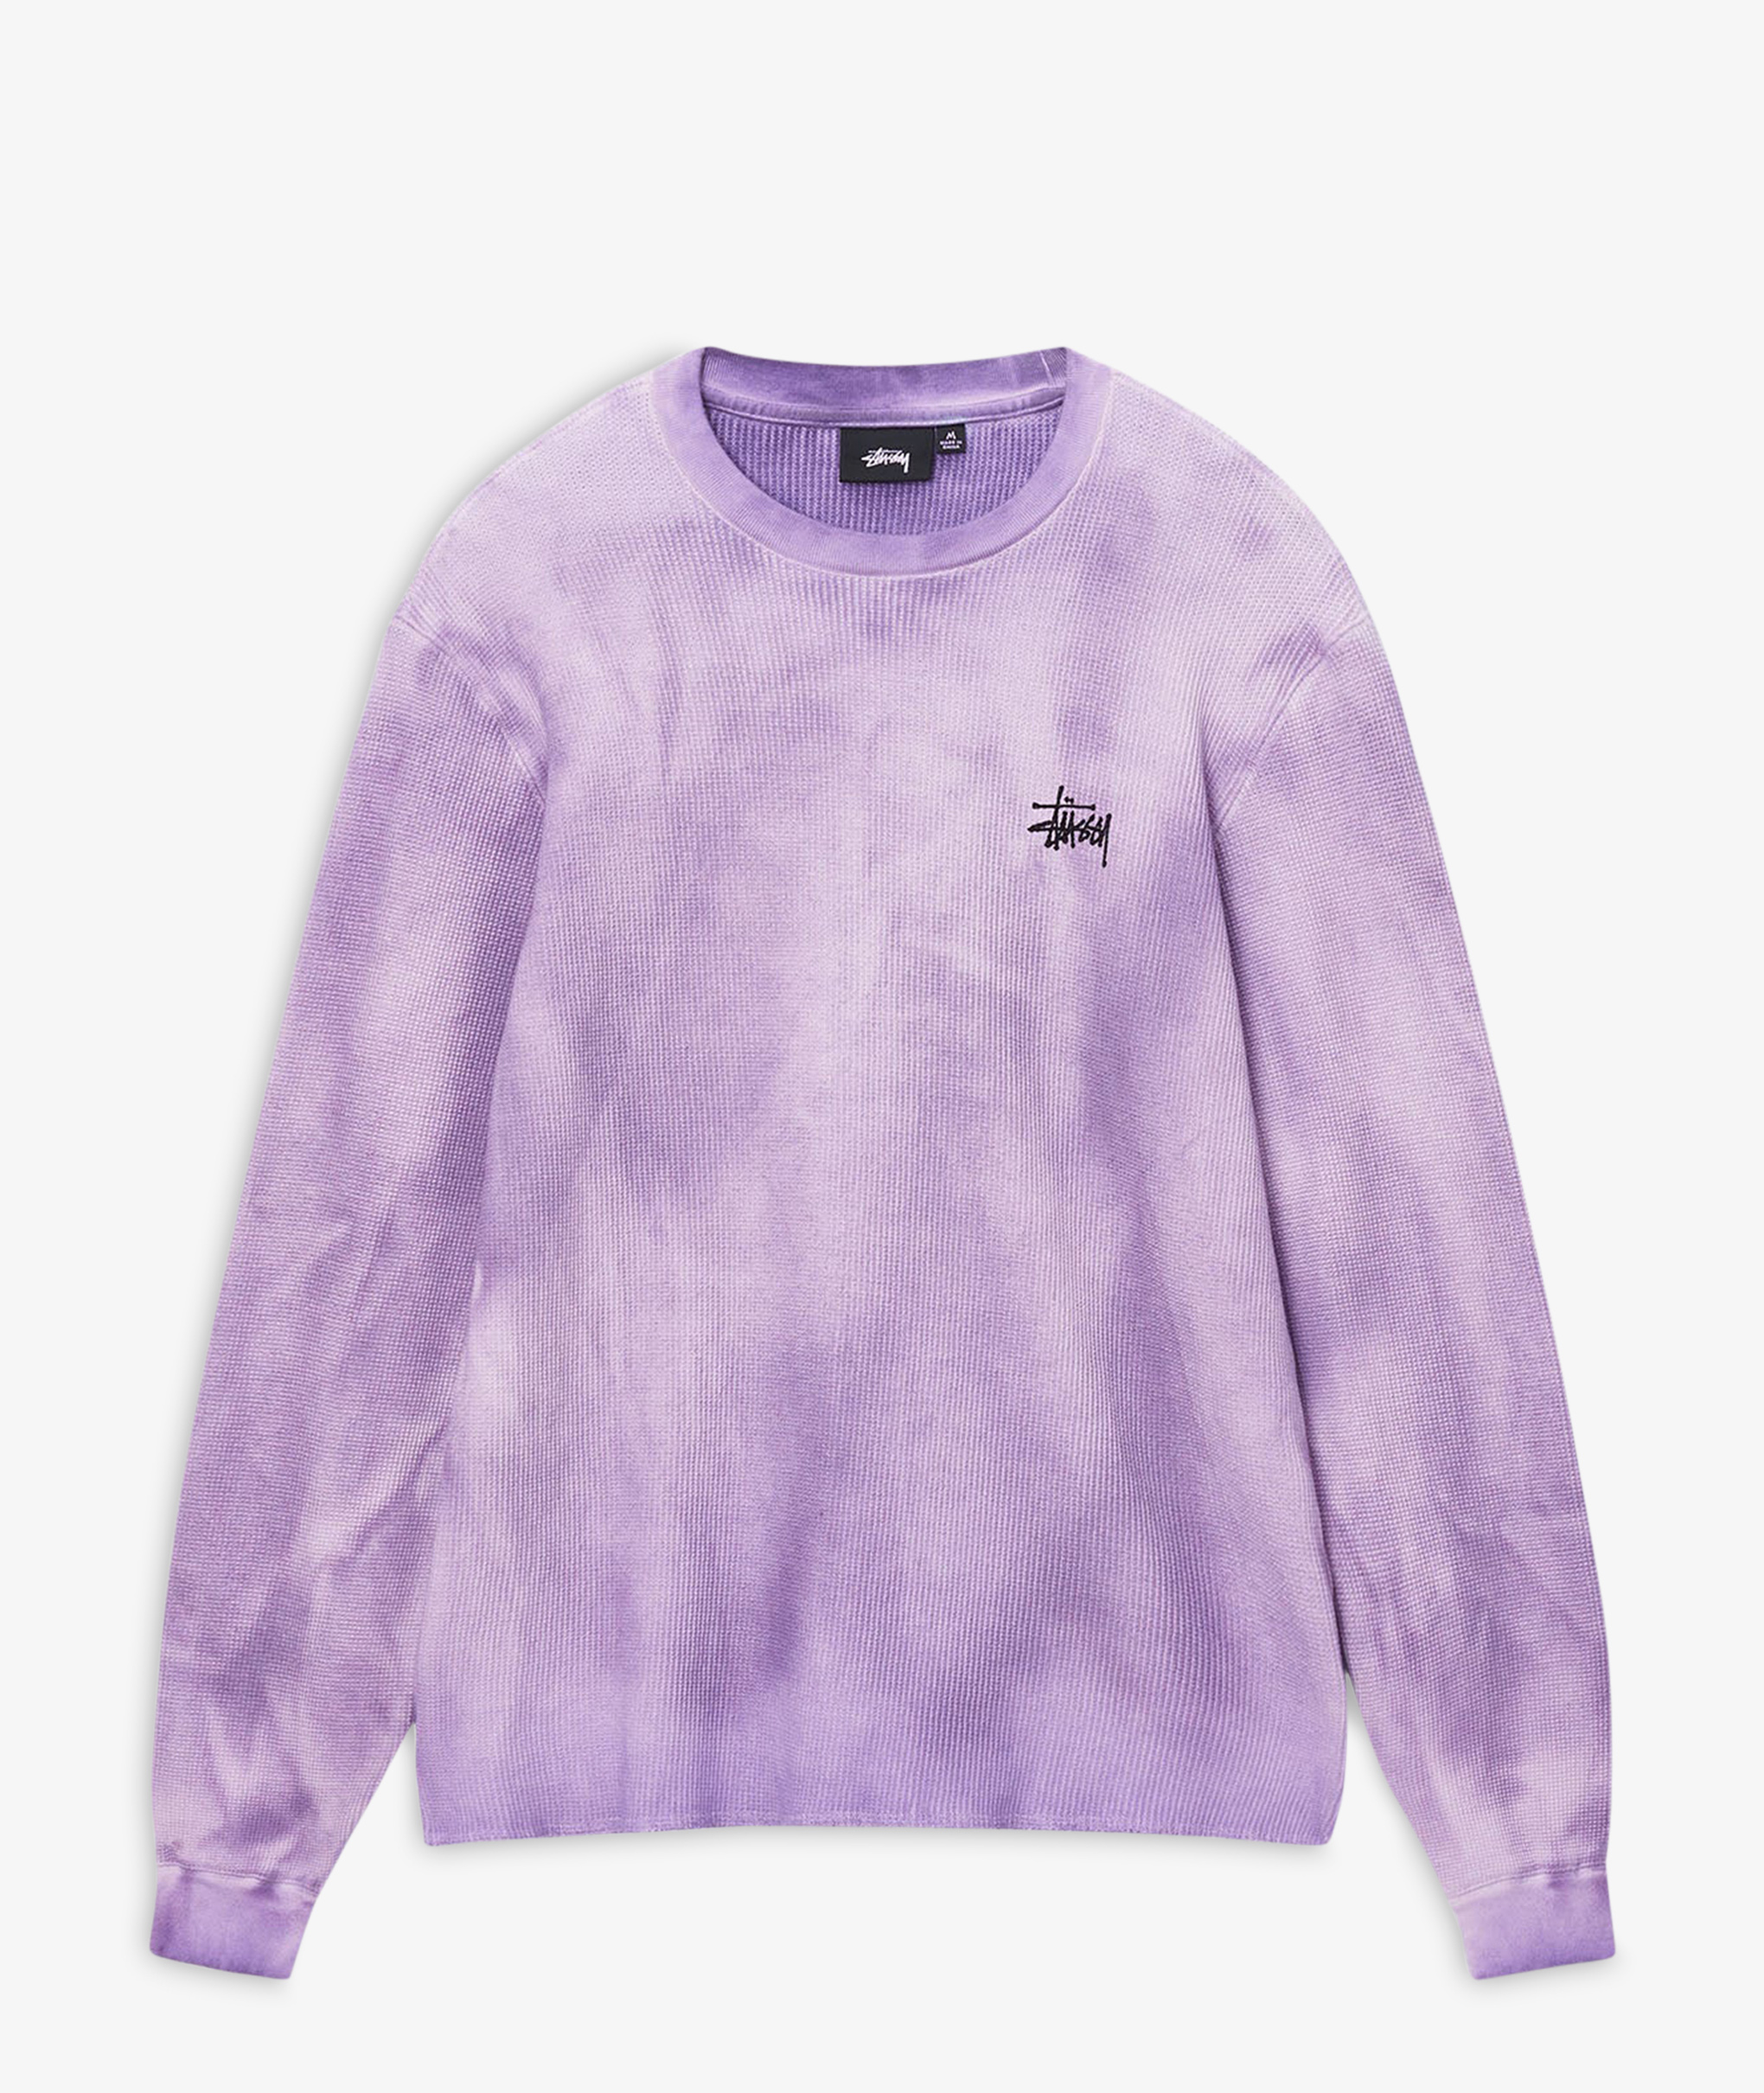 Norse Store | Shipping Worldwide - Stüssy Basic Stock LS Thermal - Lavender